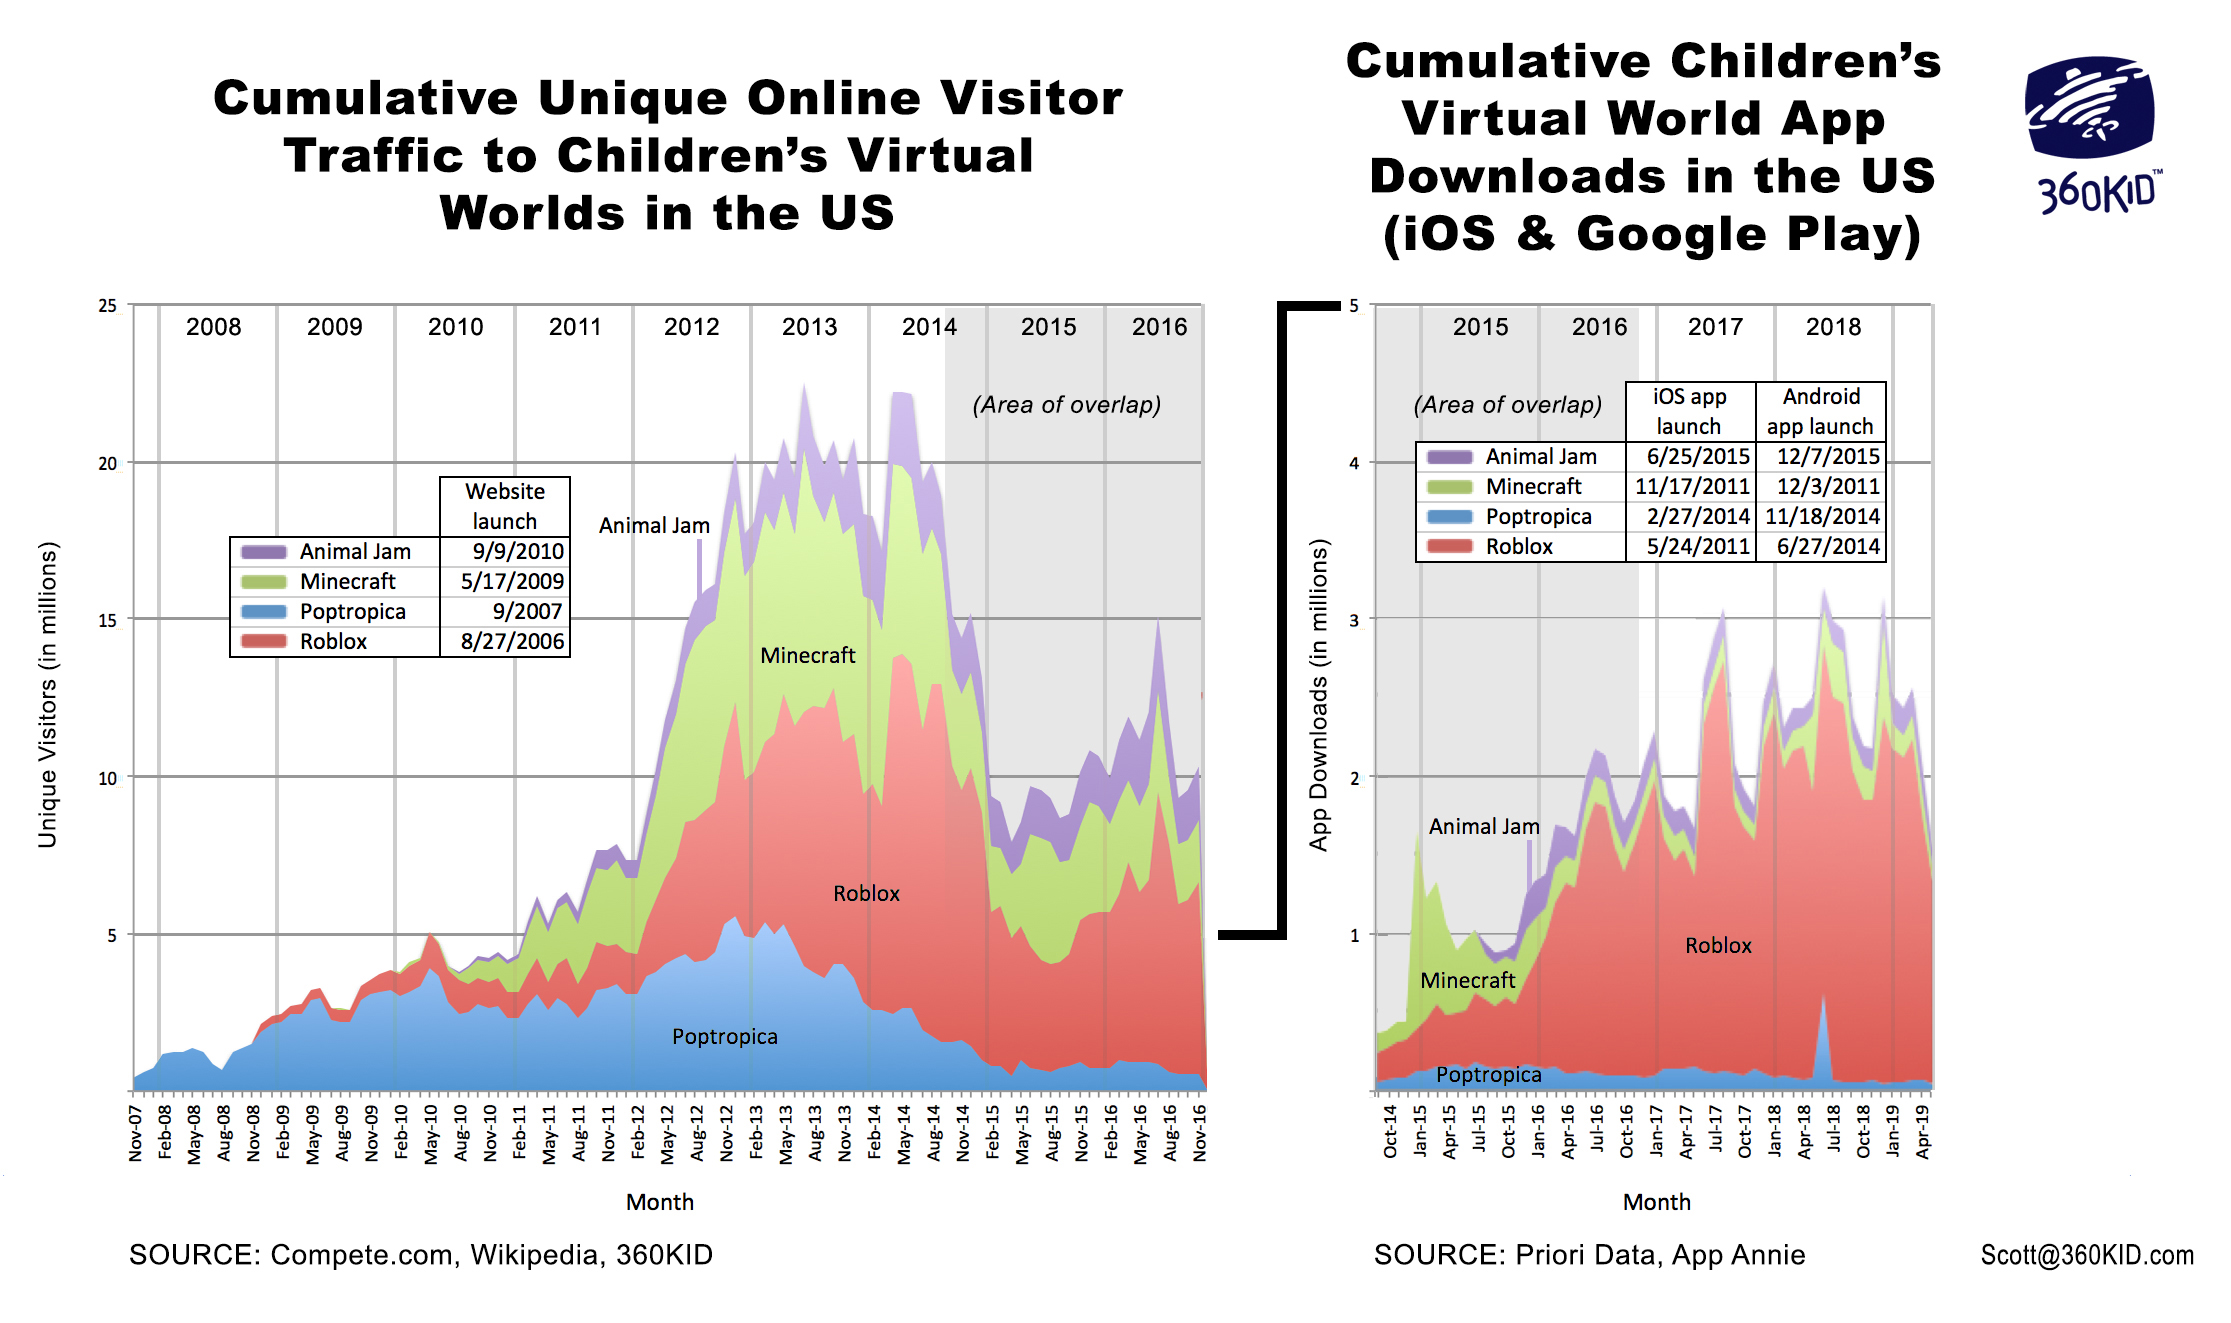 10 years of cumulative online uniques to children's virtual worlds and app downloads in the US.